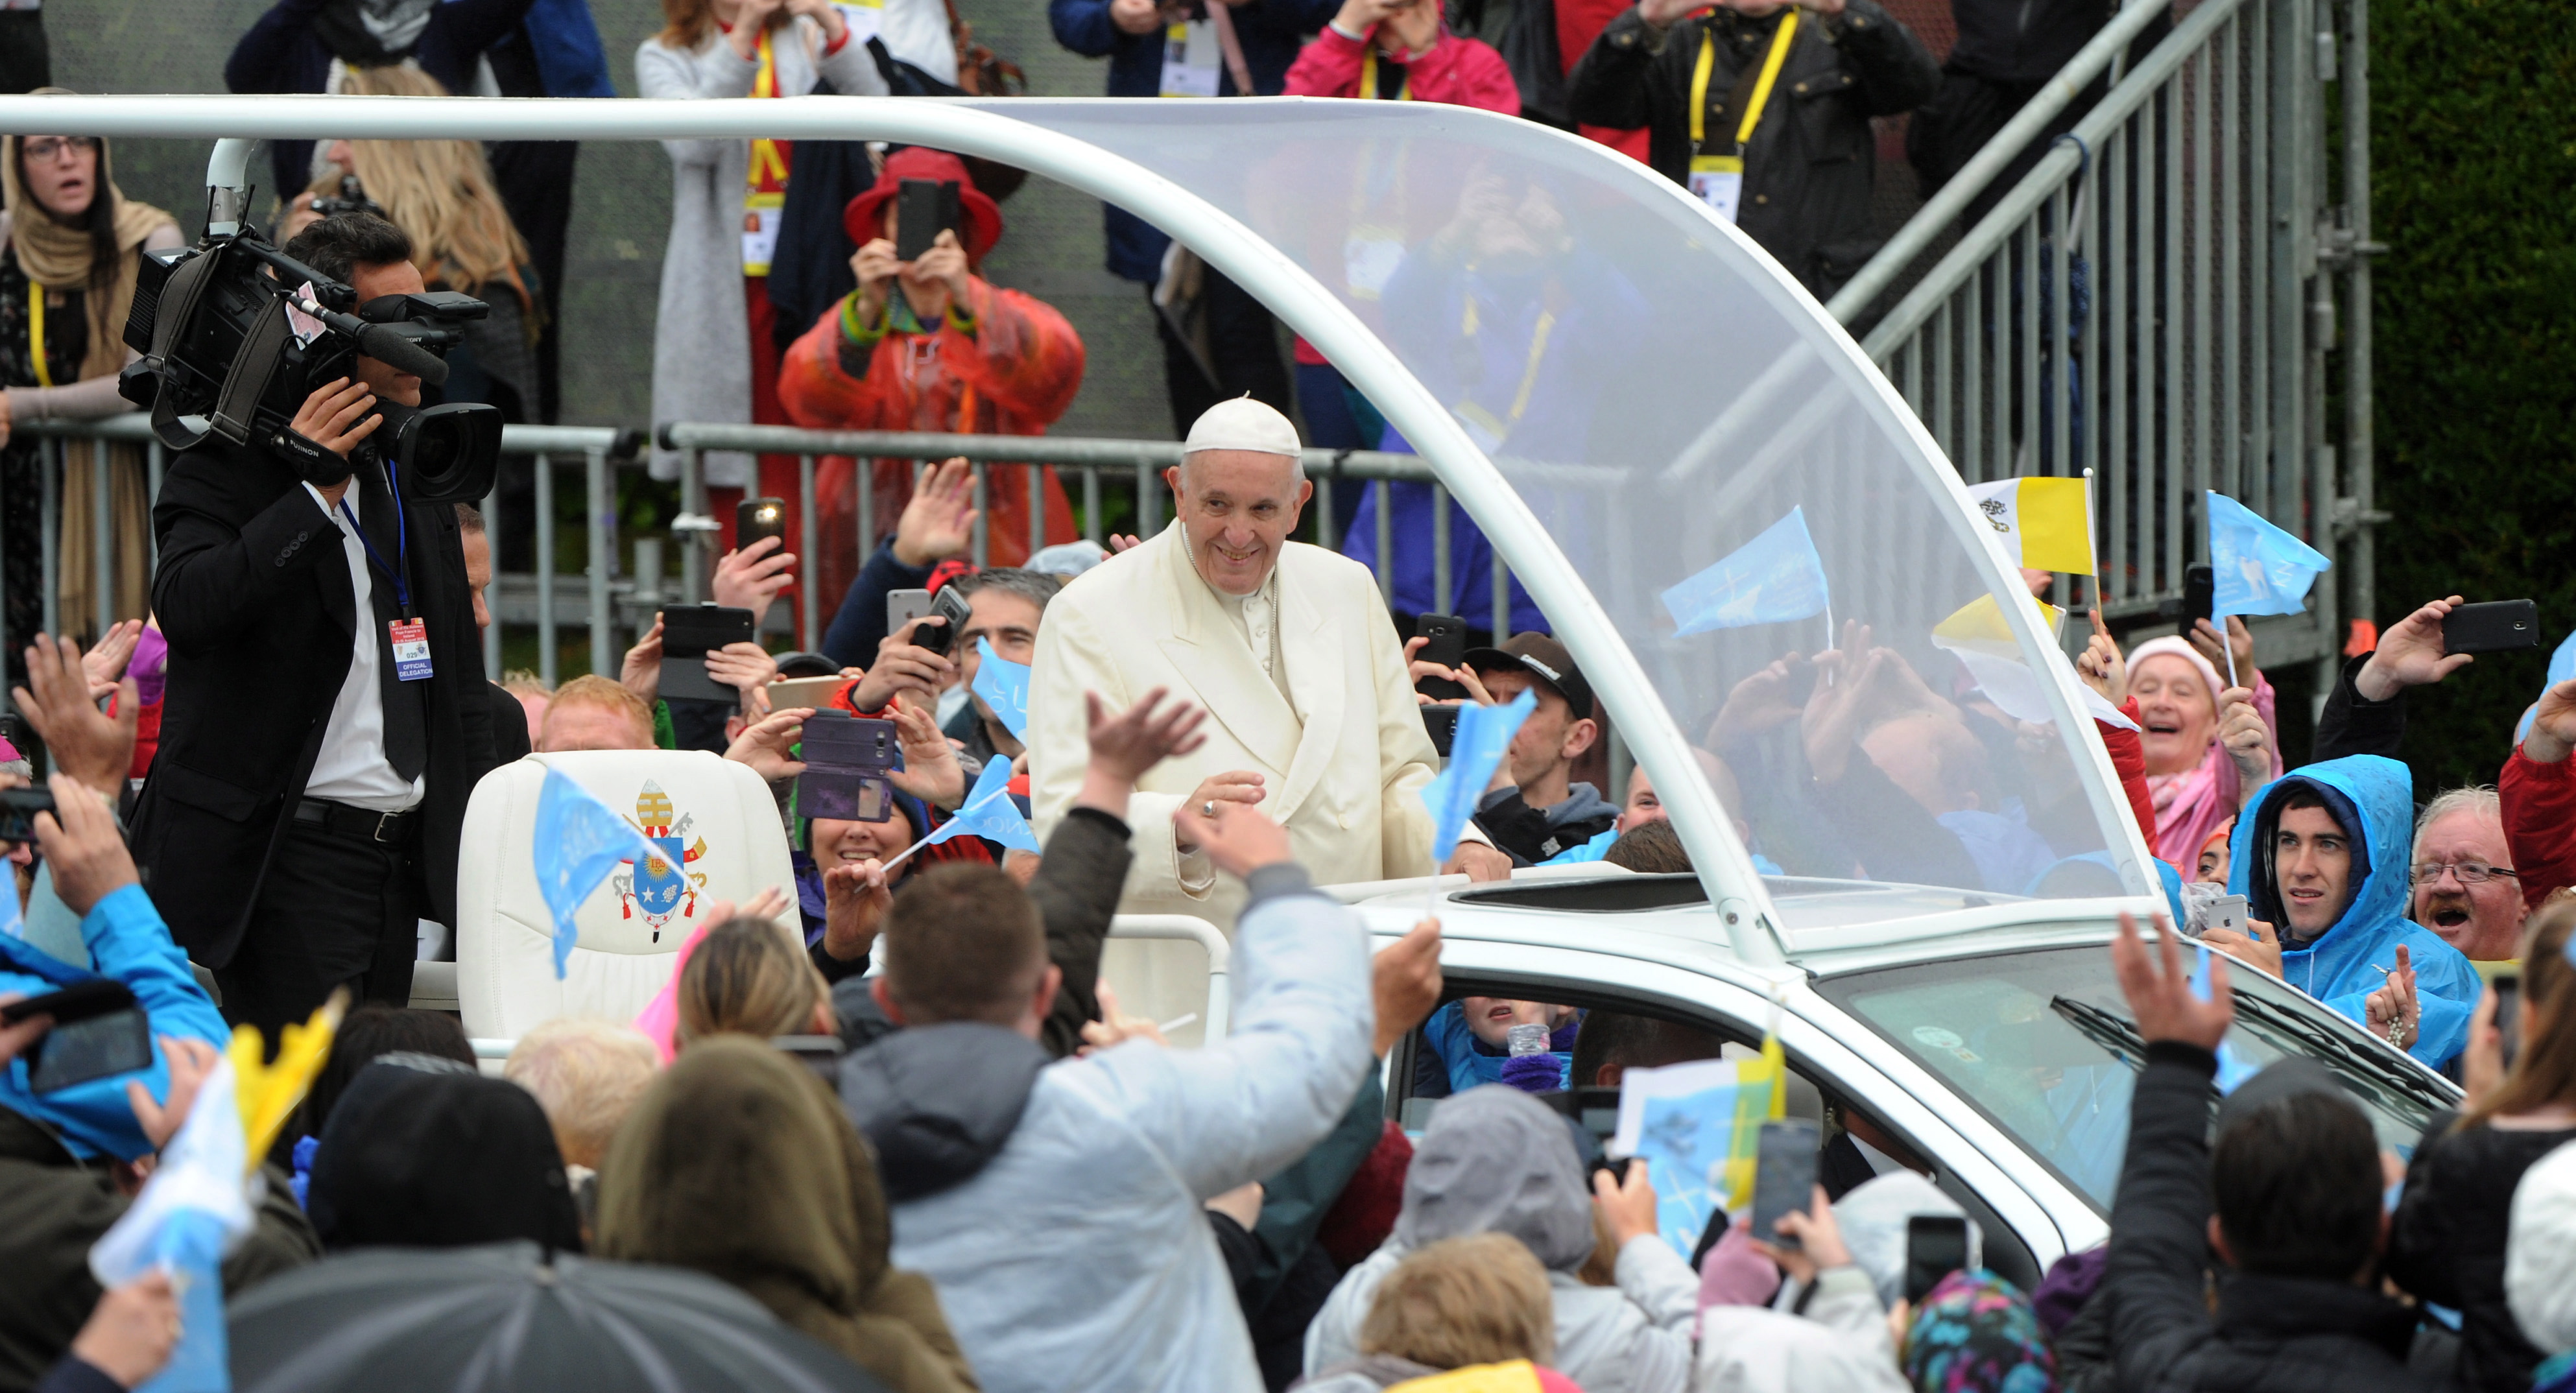 epa06973448 Pope Francis driving through the crowd at Knock shrine in Mayo, Ireland. 26 August 2018. The pontiff is visiting Ireland on 25 and 26 August 2018 to attend the World Meeting of Families (WMOF) 2018.  EPA/AIDAN CRAWLEY